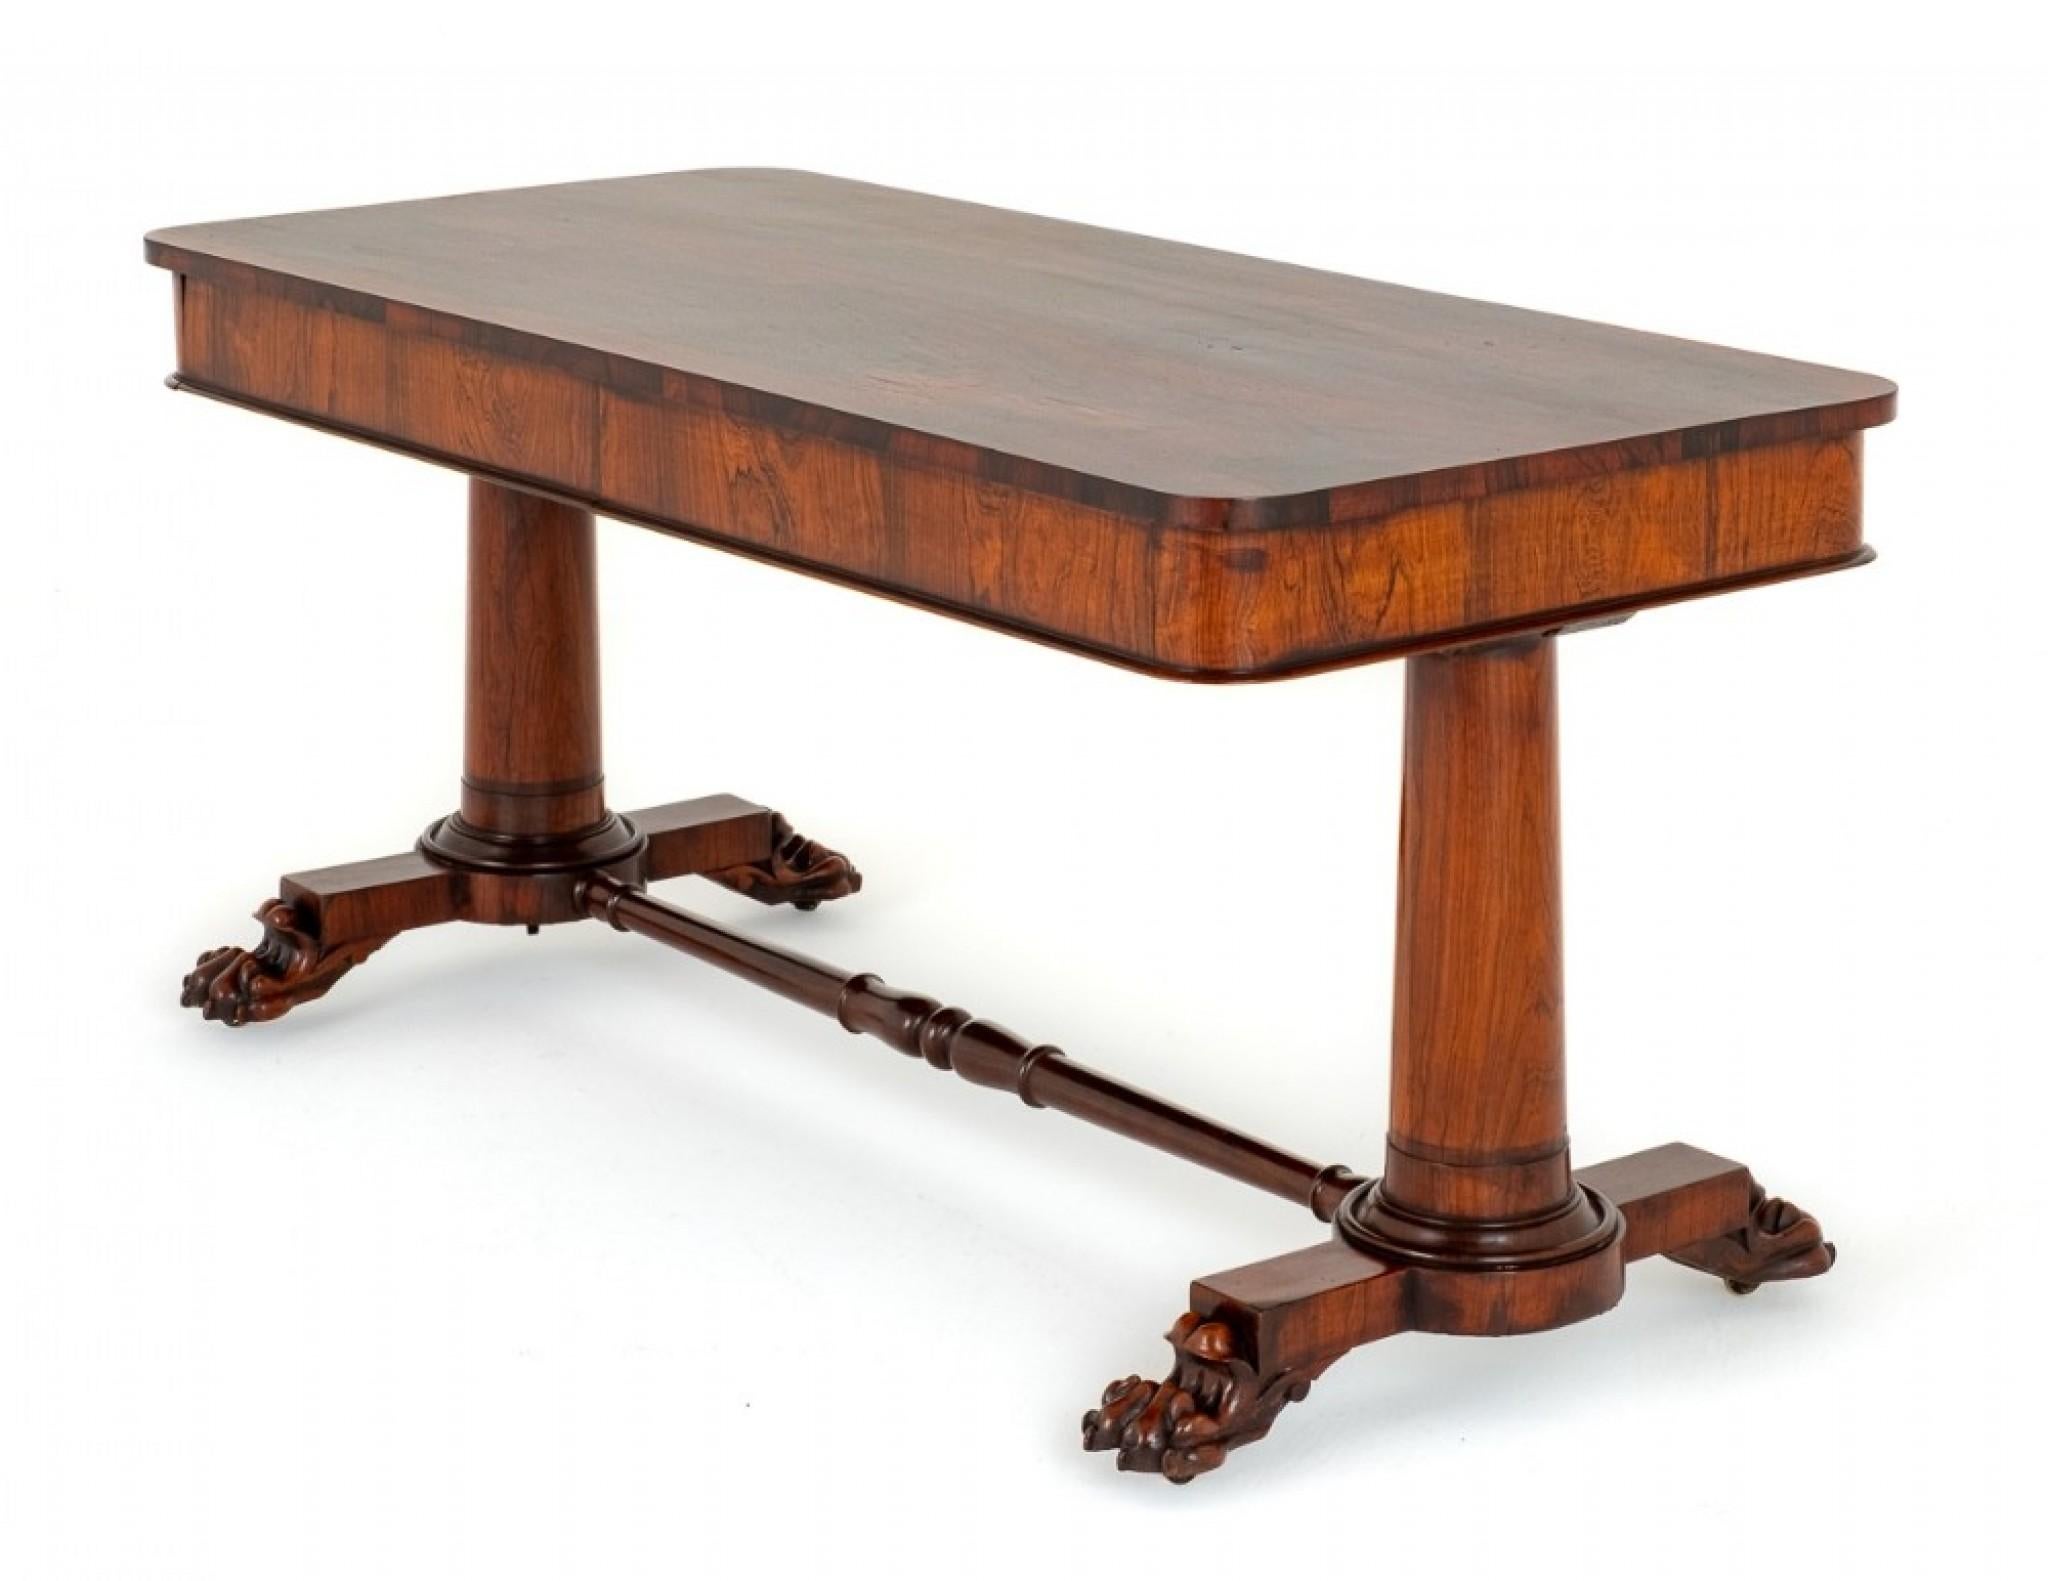 William IV Library Table.
Circa 19th Century
The Top of the Table Featuring Wonderful Rio Rosewood Timbers.
The Table Having 2 Working Mahogany Lined Drawers (note the fine dovetails)
The Table is Raised Well Carved Lions Paw Feet, Turned Columns